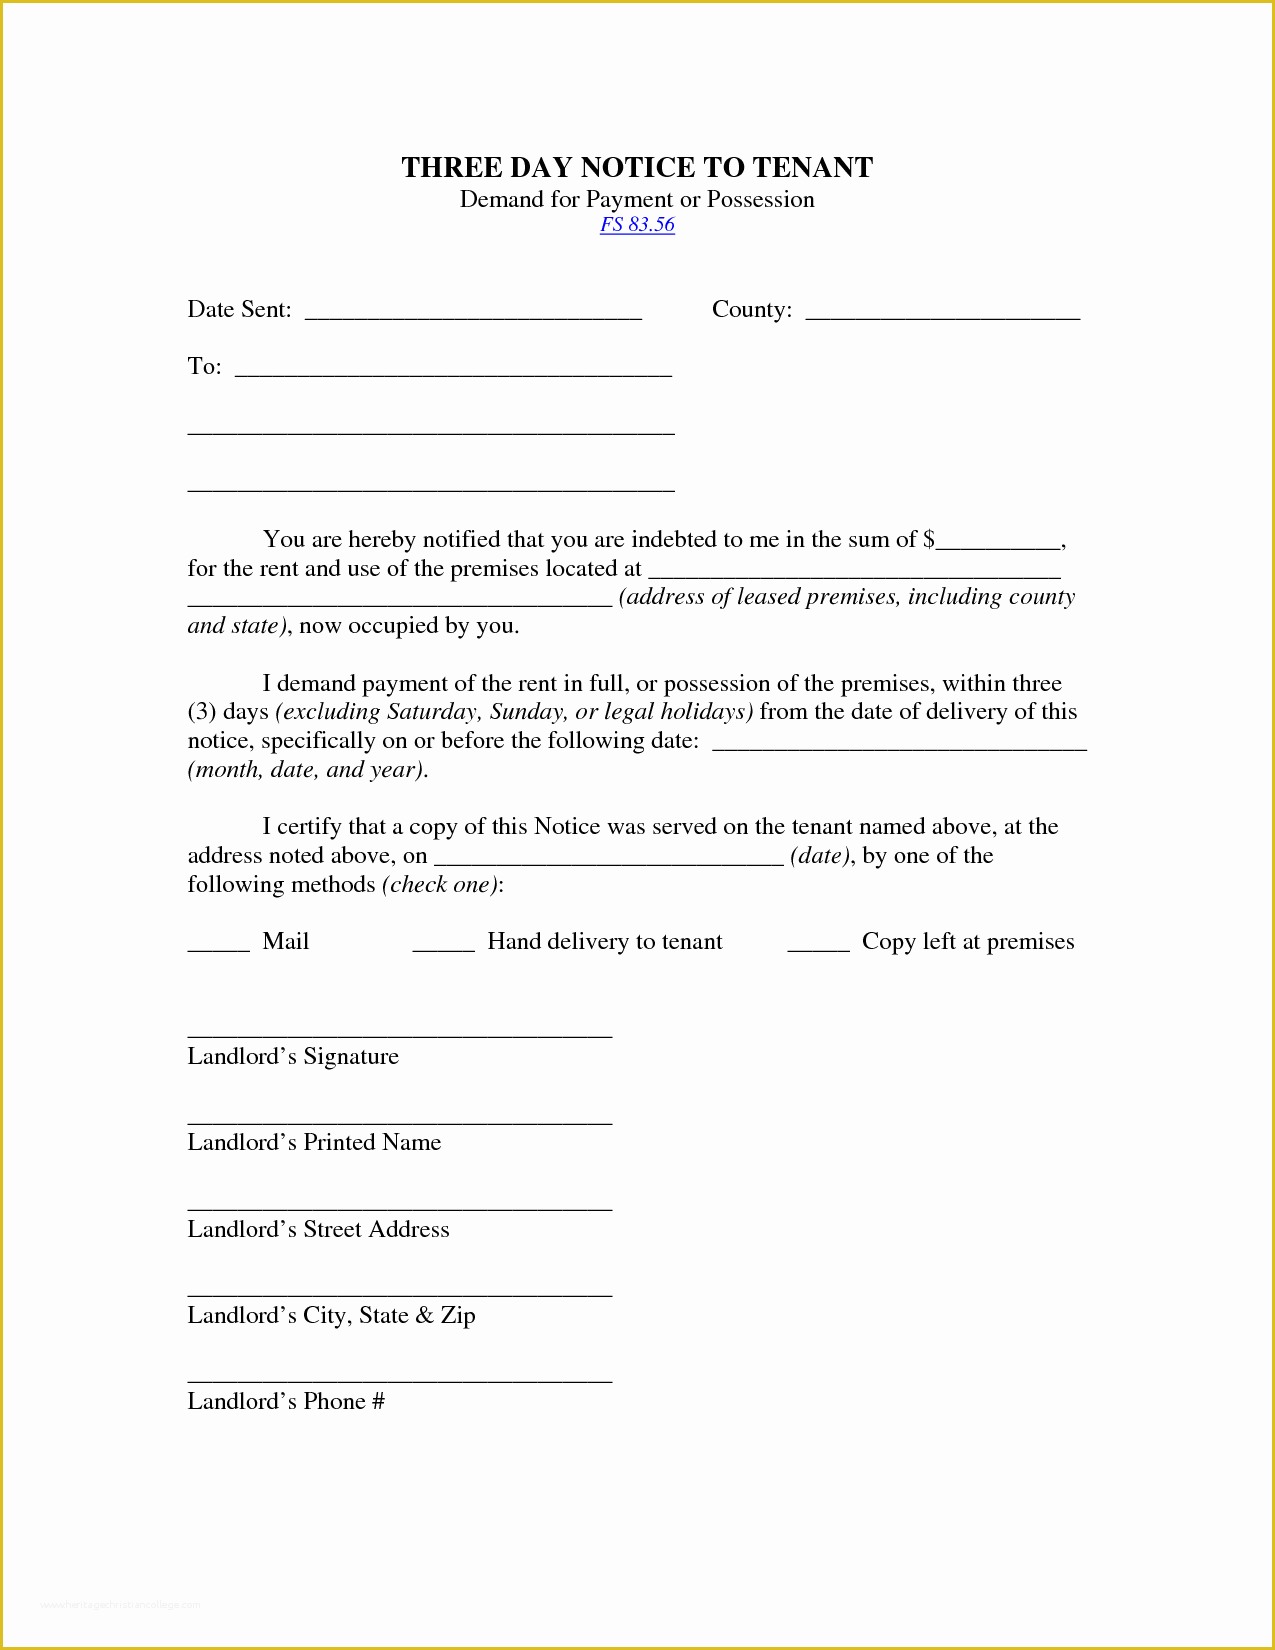 Free Eviction Notice Template California Of 3 Day Notice form California Cool Required with 3 Day